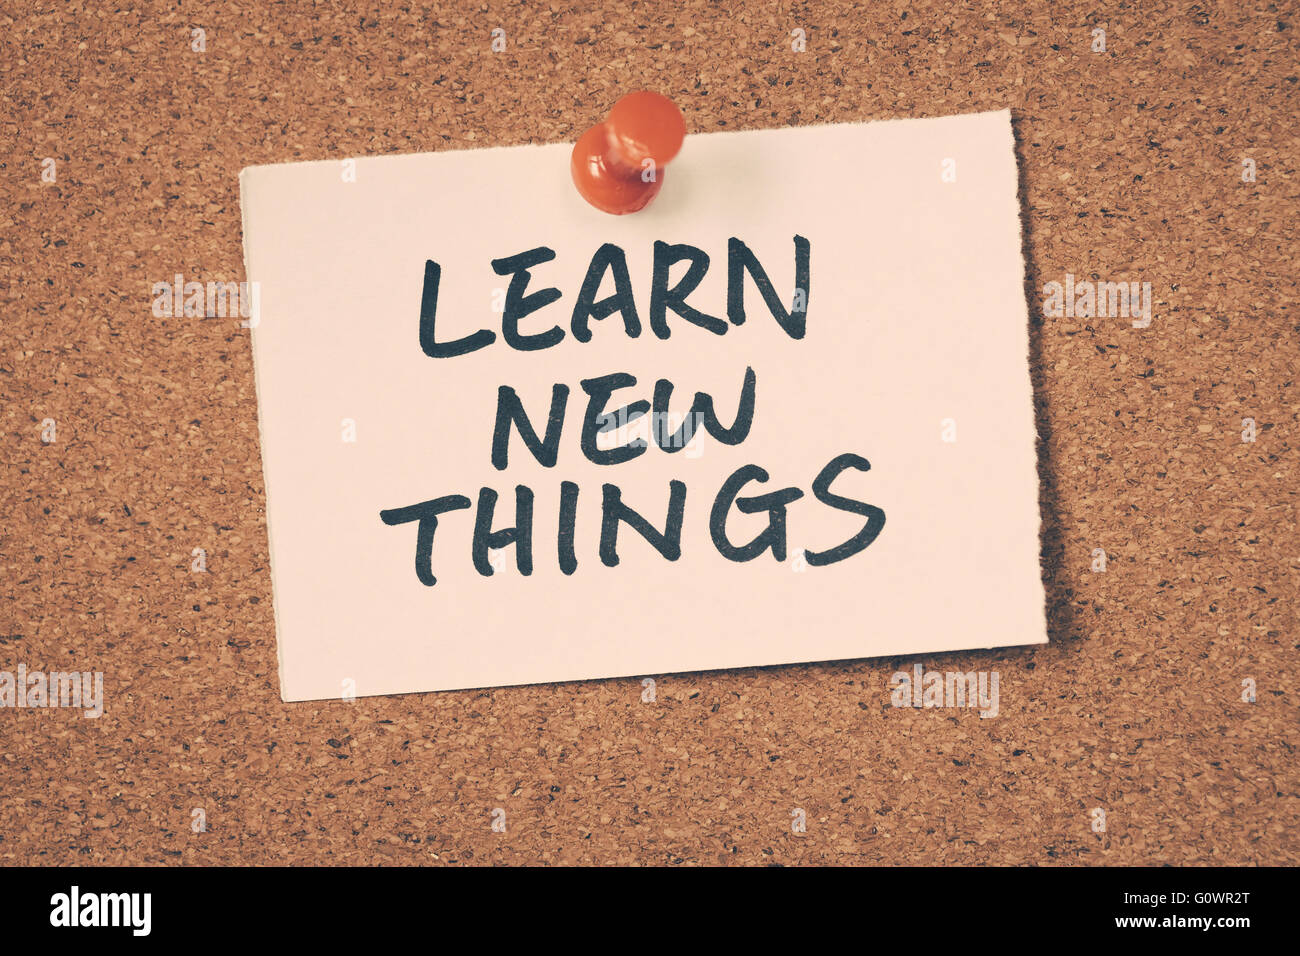 learn new things Stock Photo